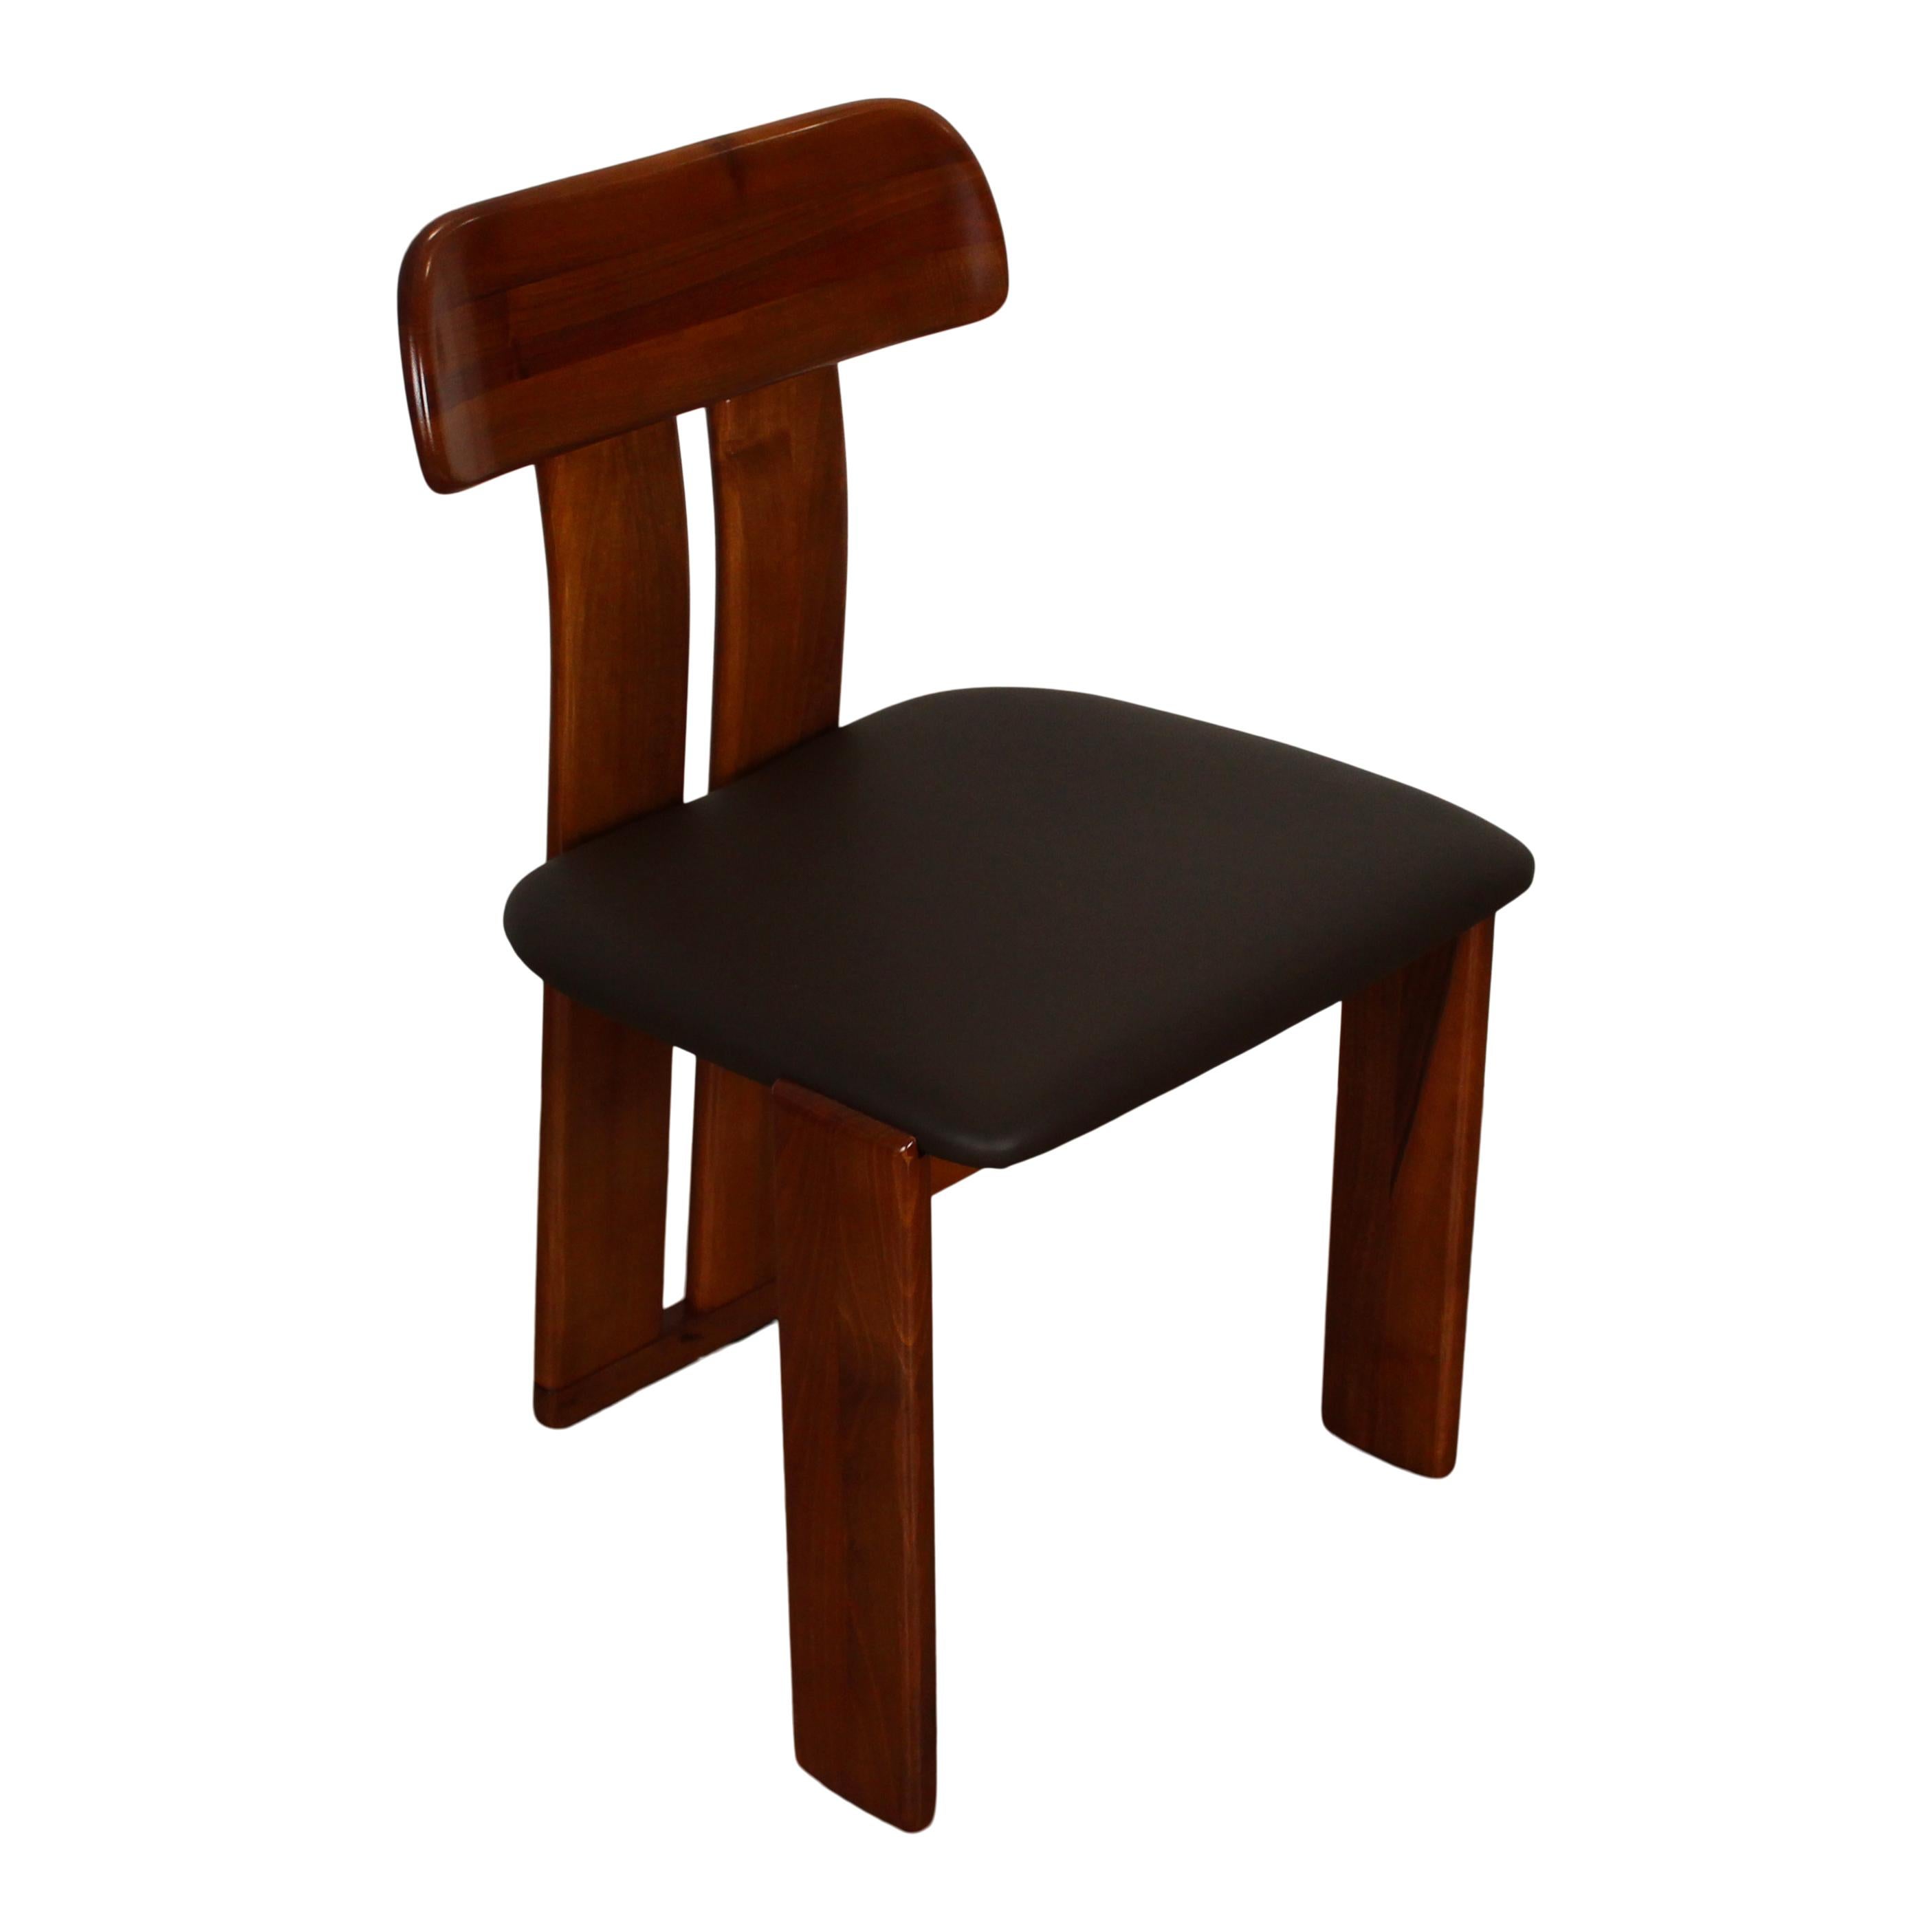 Mario Marenco Walnut Sapporo Dining Chairs for Mobilgirgi, 1970s, Set of 8 For Sale 5